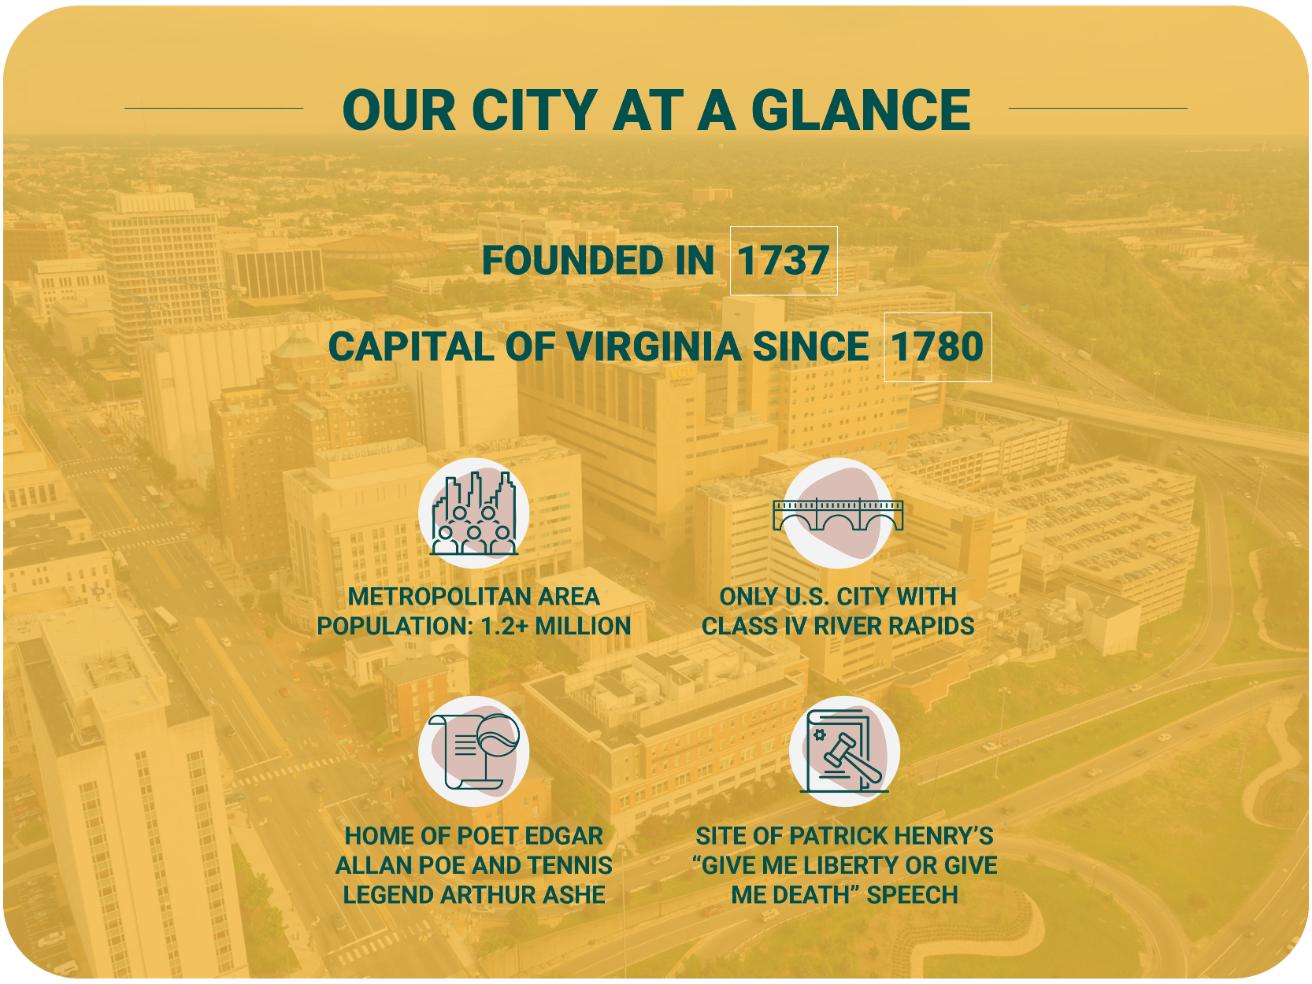 Our City at a Glance